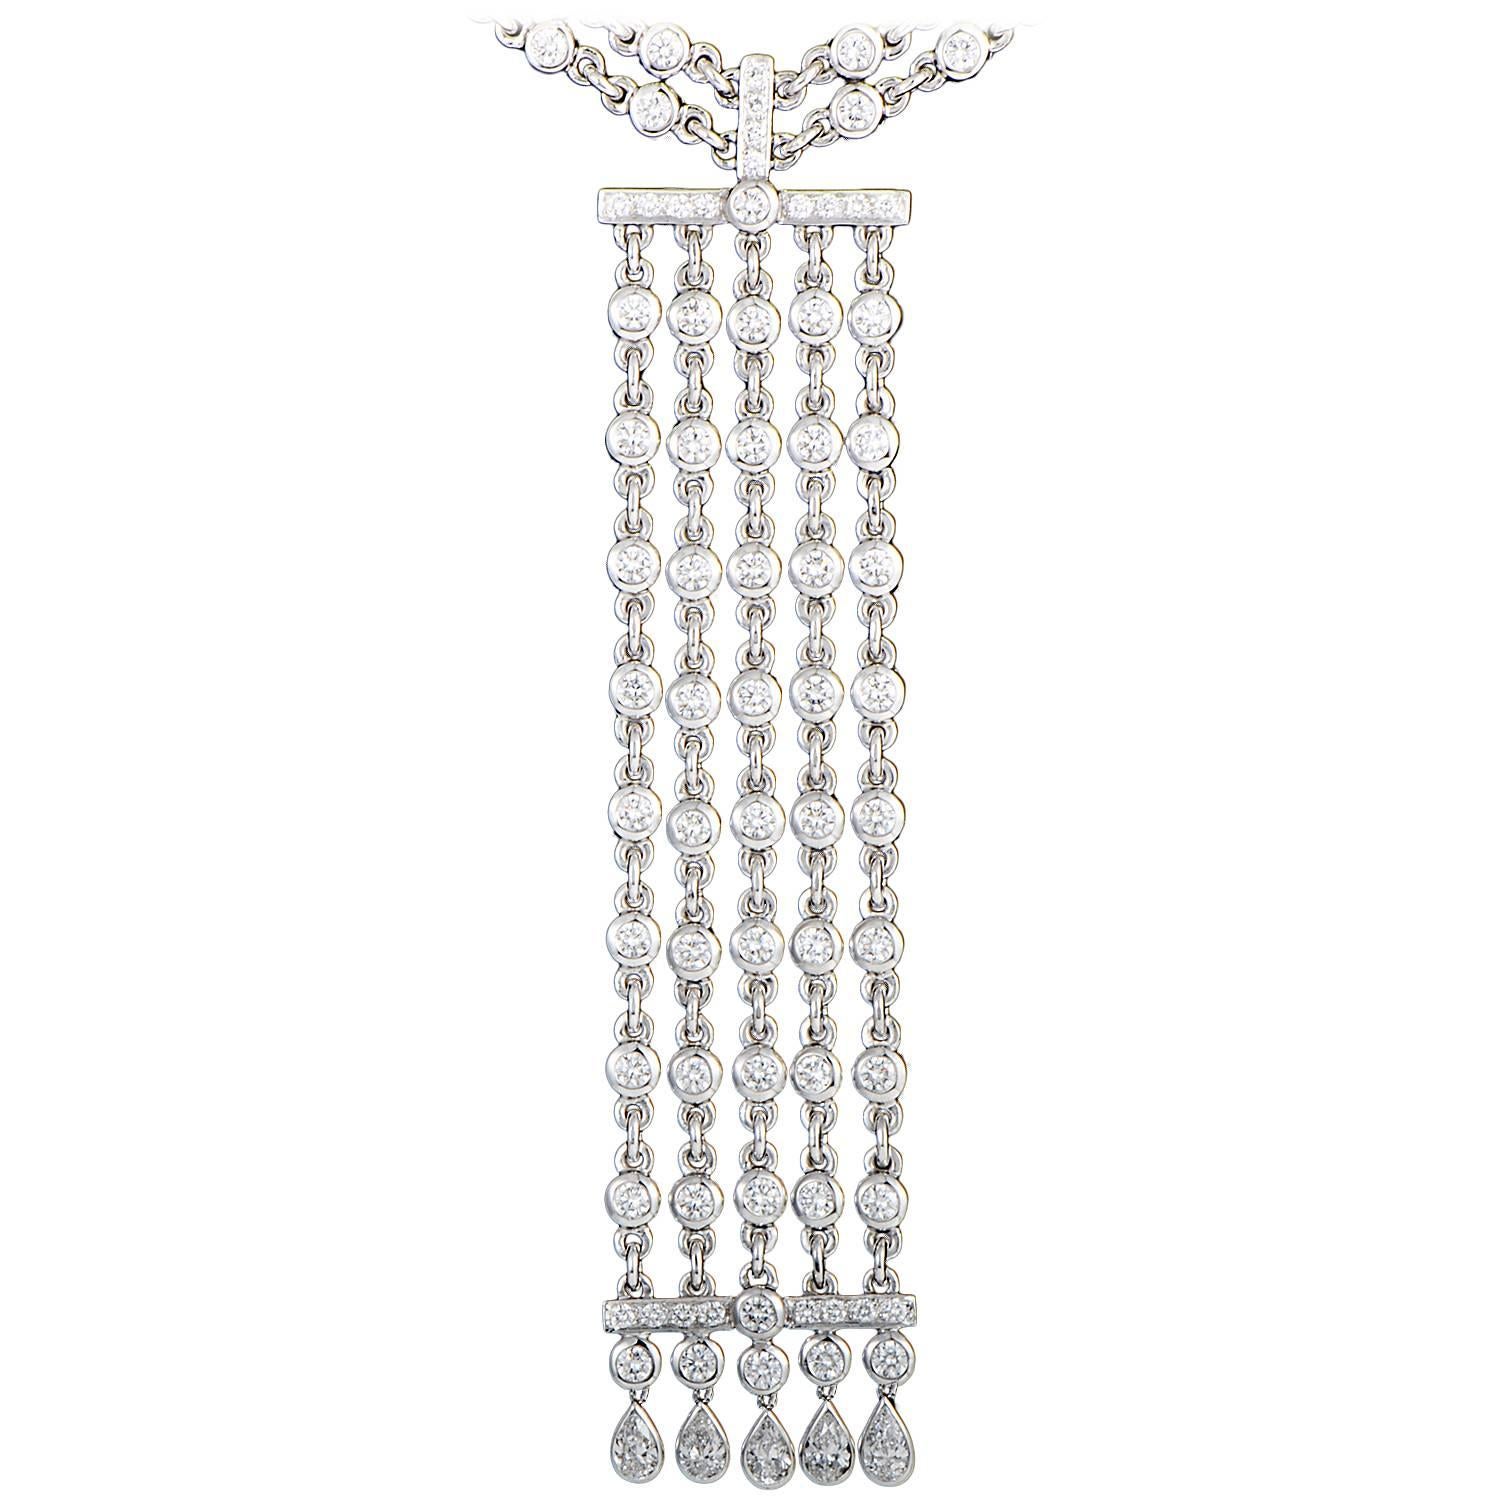 An item of pure prestige and graceful elegance that will dazzle with its scintillating arrangement of diamonds weighing in total 11.82 carats and splendid shimmer of platinum, this outstanding necklace from Graff is a majestic sight to